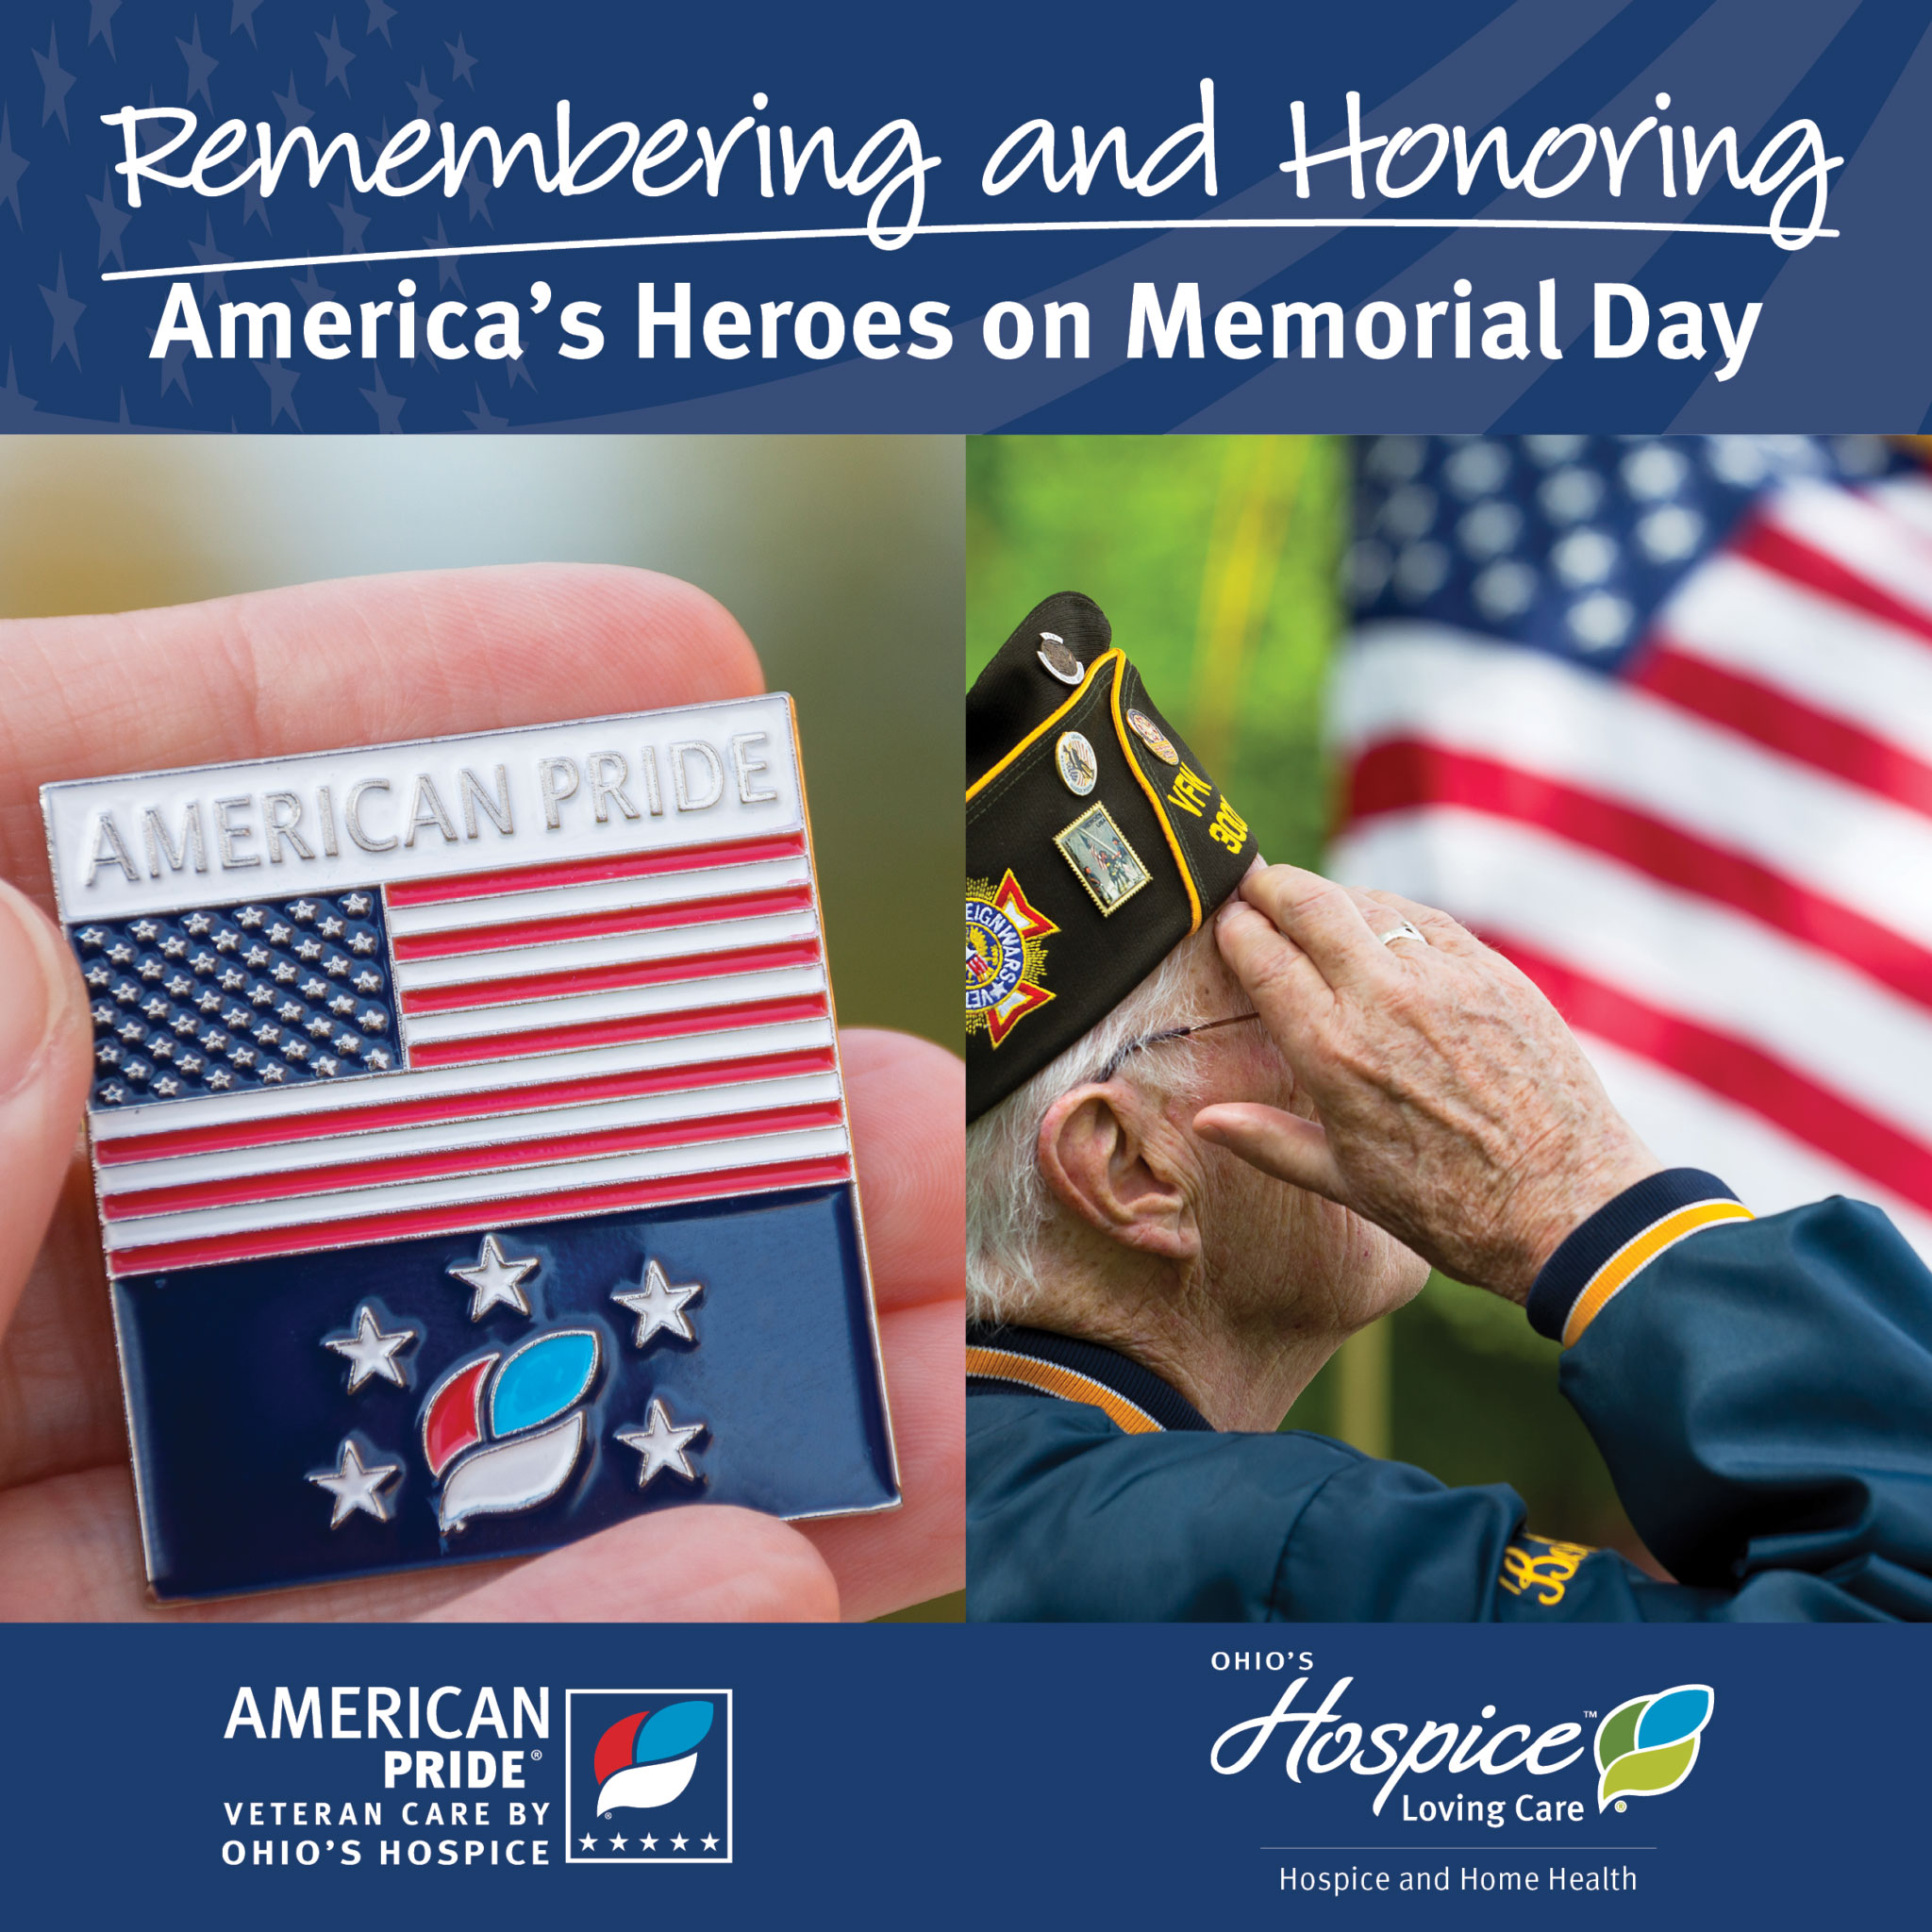 Remembering and Honoring America's Heroes on Memorial Day